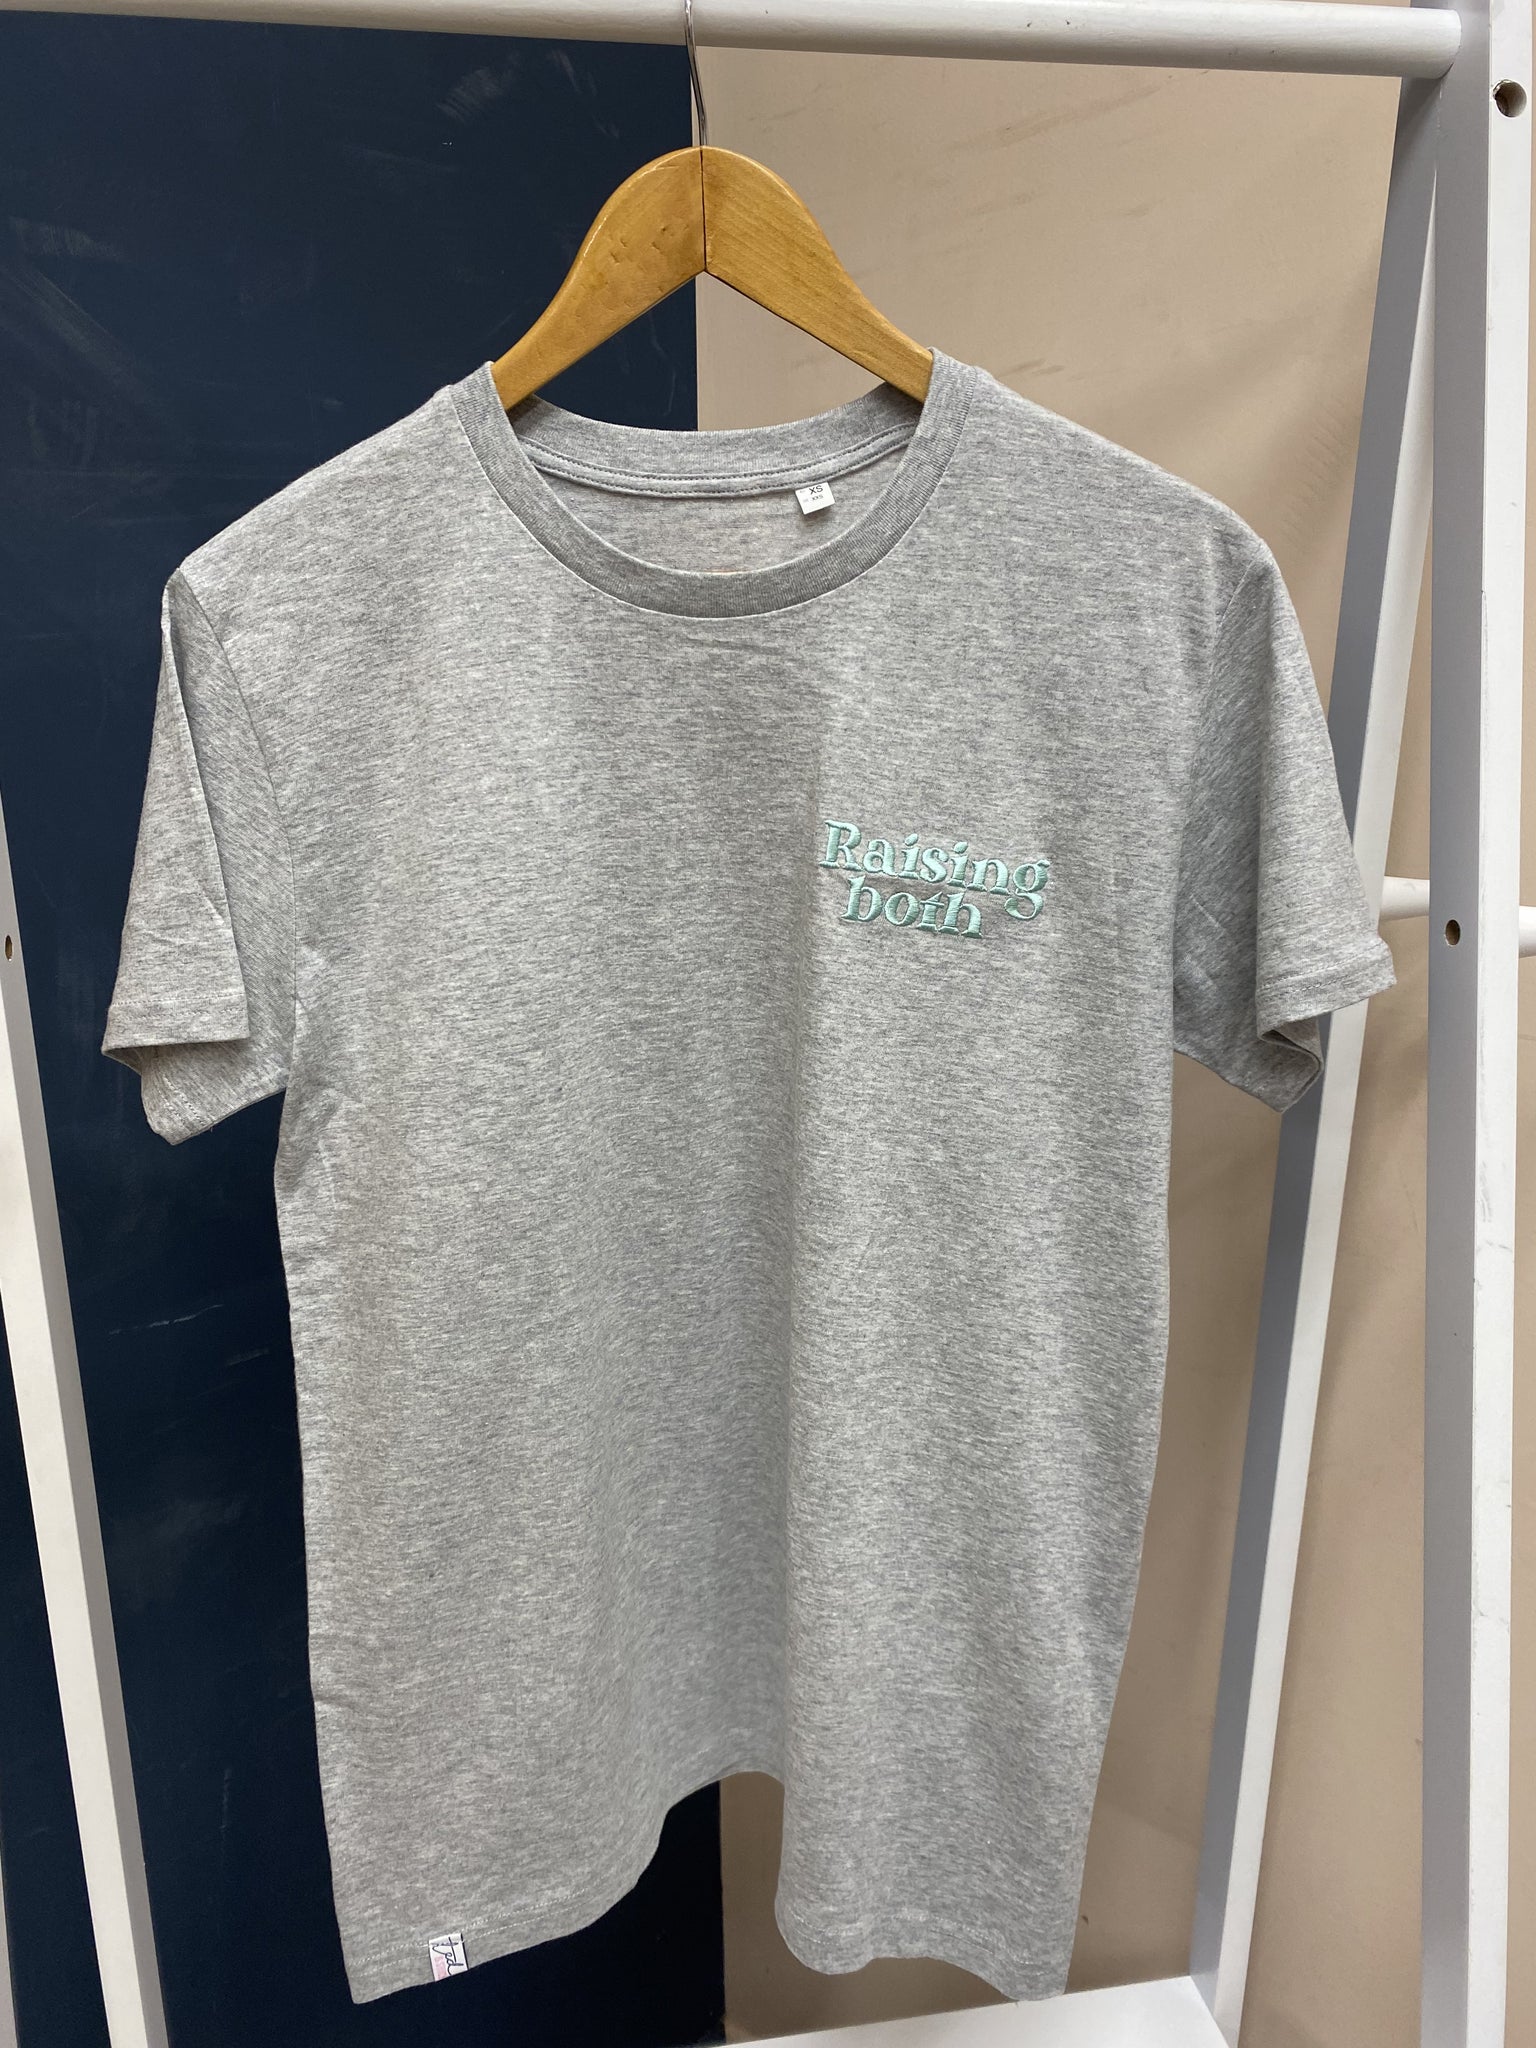 SAMPLE SALE 'Raising Both' Grey T-Shirt with peppermint stitching, various sizes available